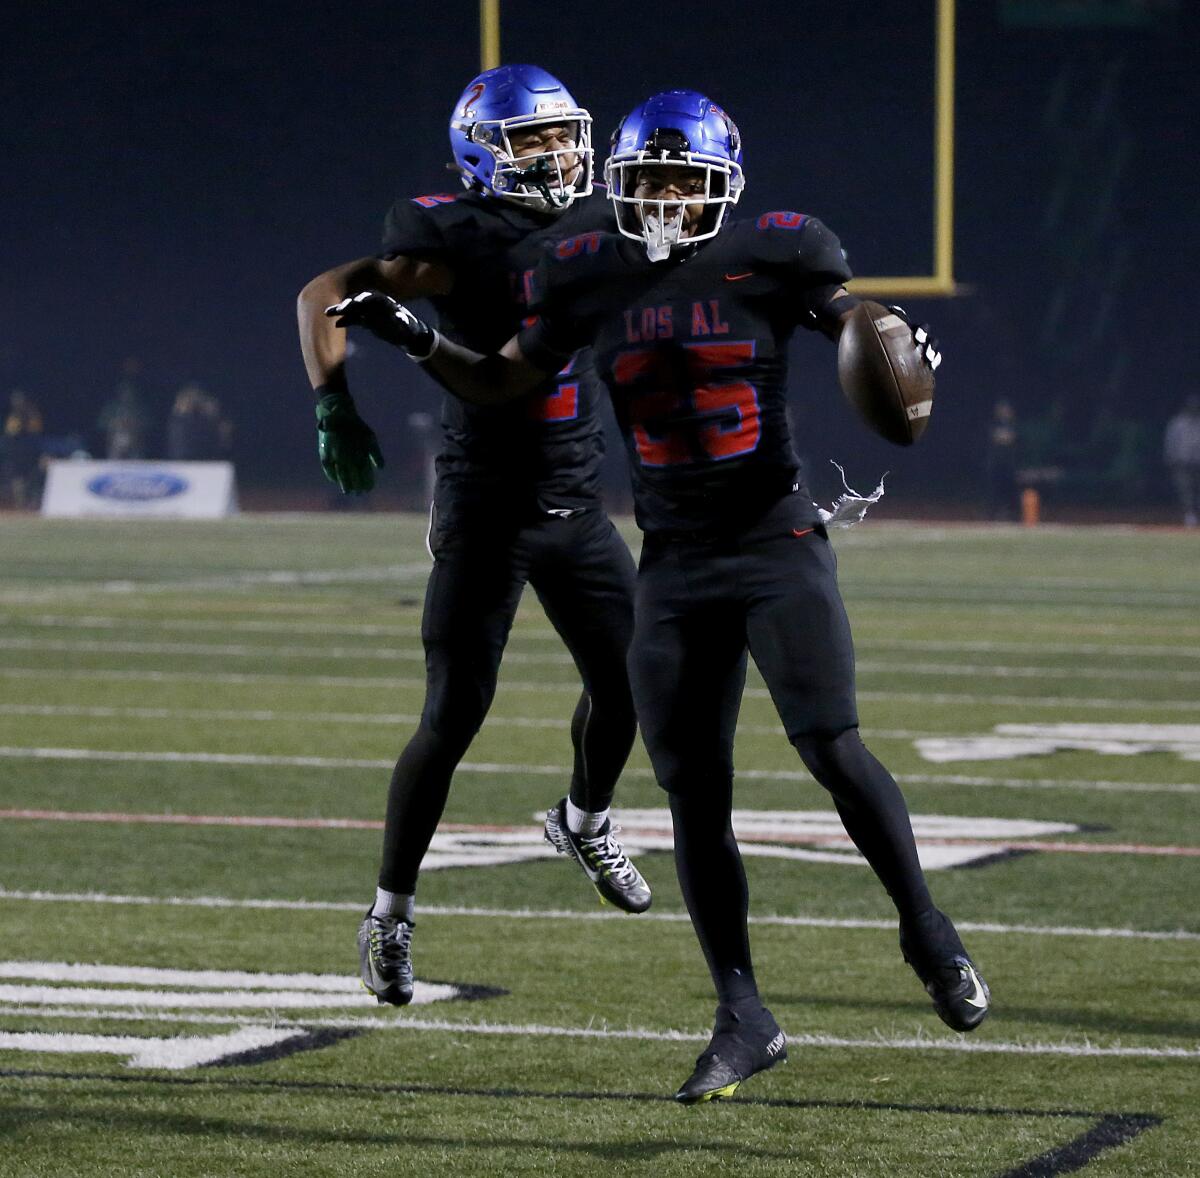 Los Alamitos running back Anthony League celebrates with teammate Gavin Porch by jumping in the air.